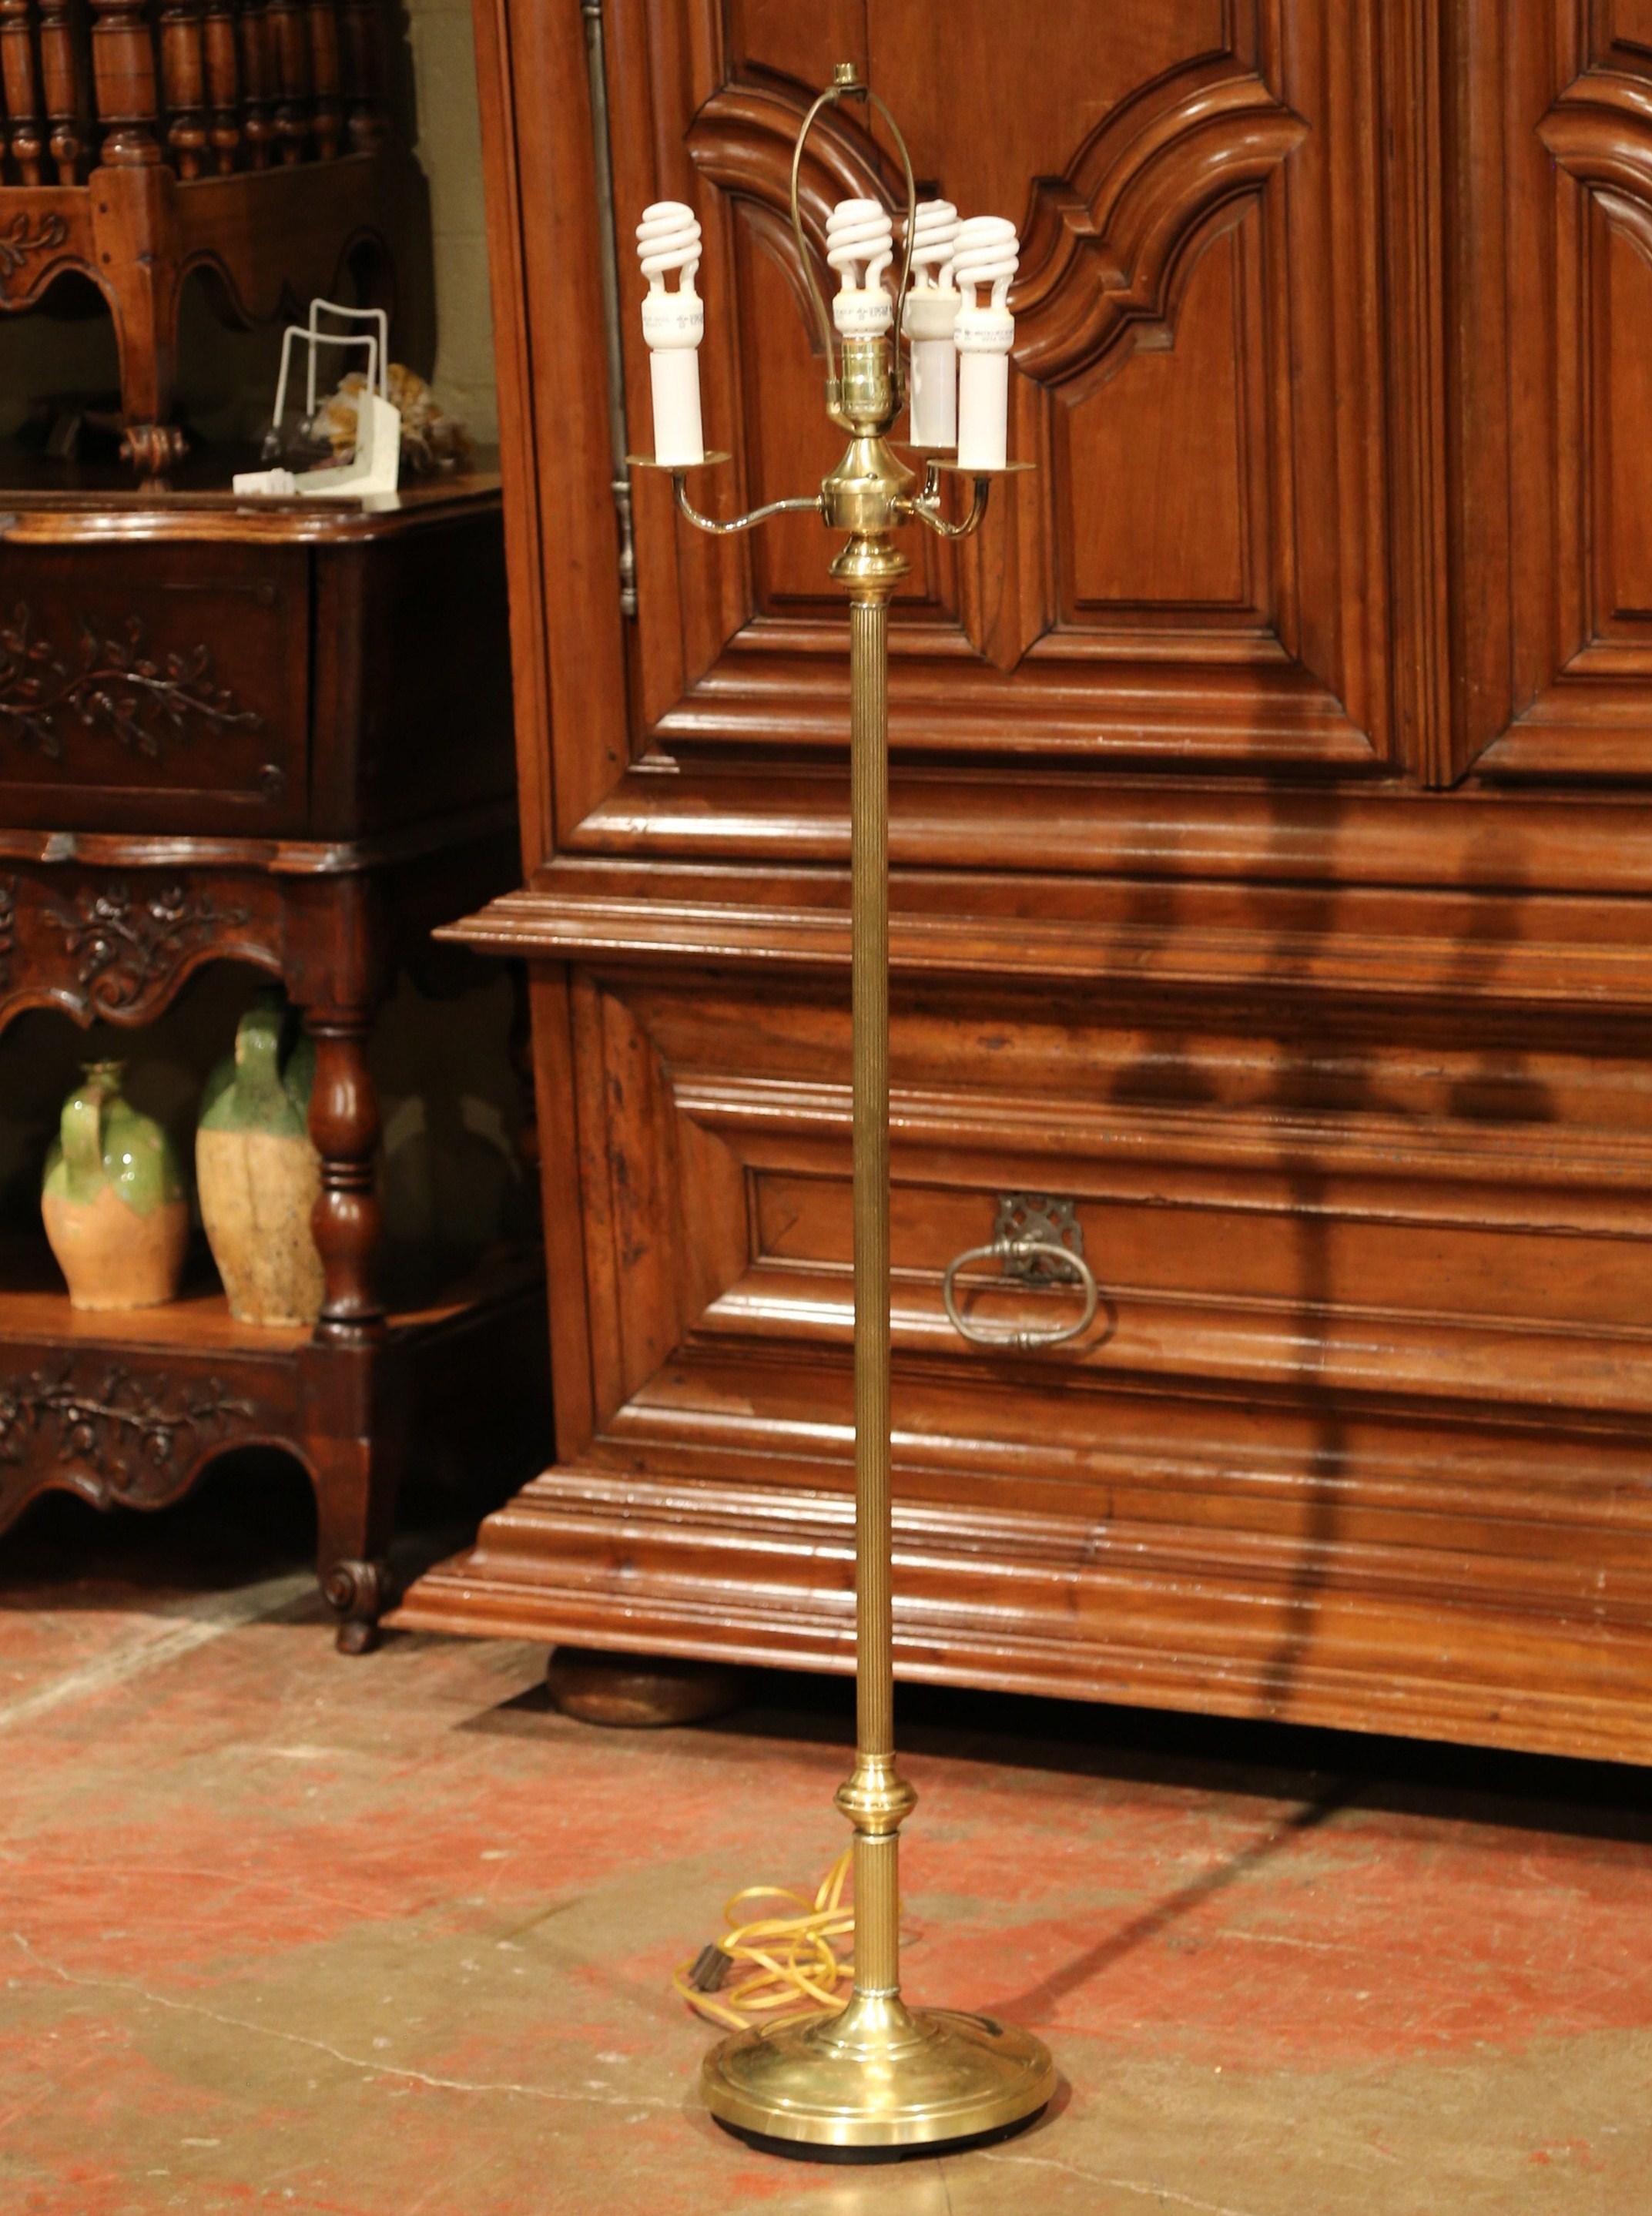 This elegant, vintage floor lamp was crafted in America, circa 1970. The simple, traditional light features a circular brass base with a long decorated stem. The lamp has been rewired with a four-bulb device including a center light, with double